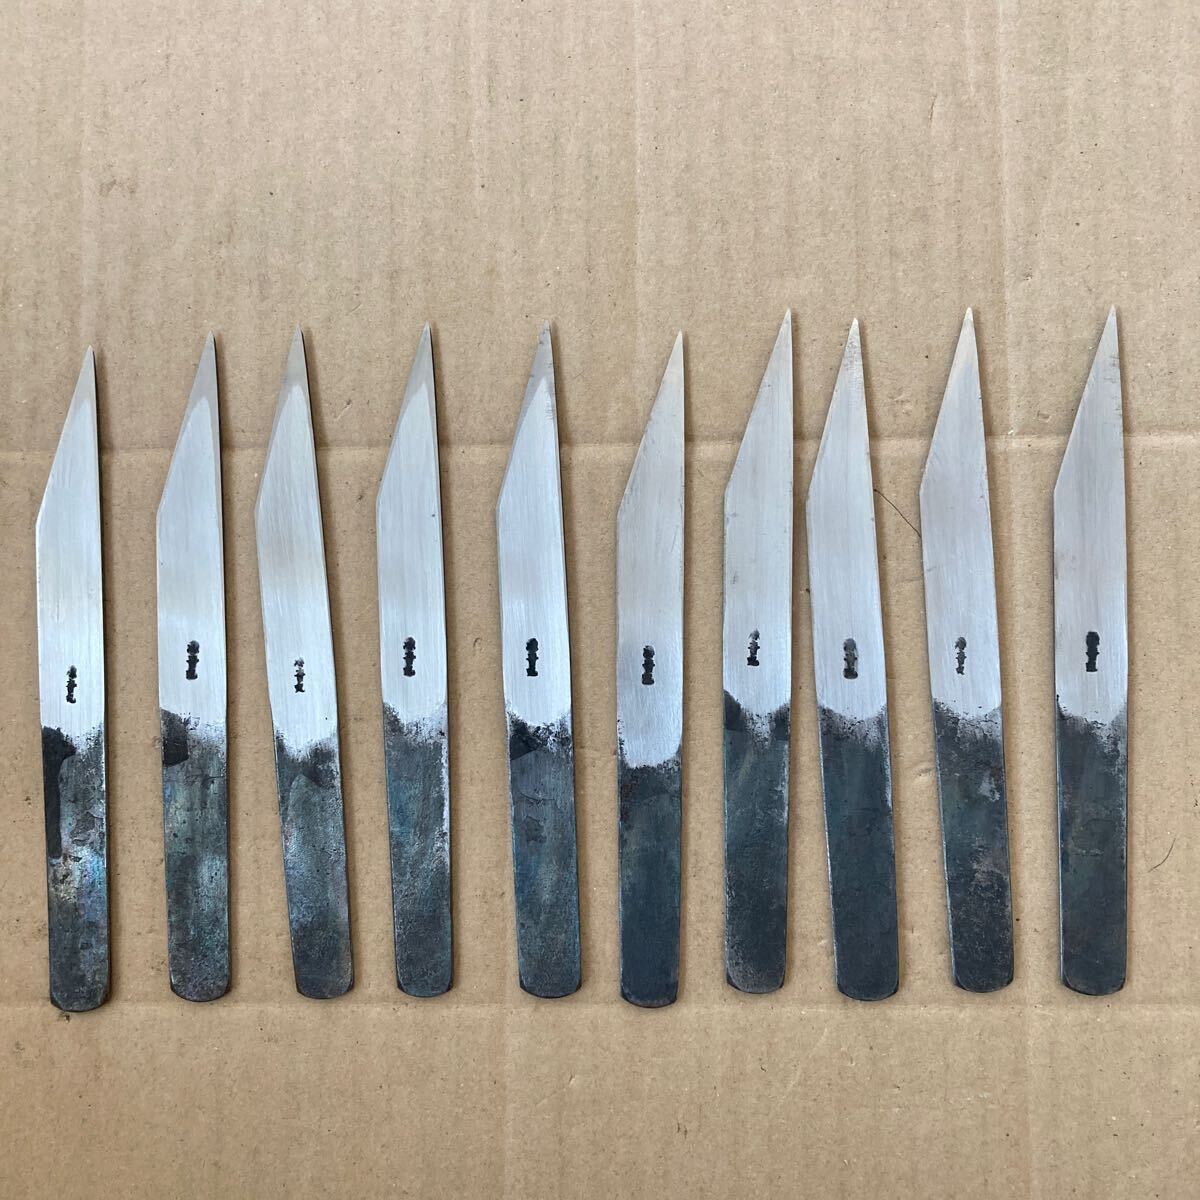 *08 metallic material shop stock goods unused goods sound circle cut ... knife 10 point together total length approximately 180mm blade . approximately 53mm